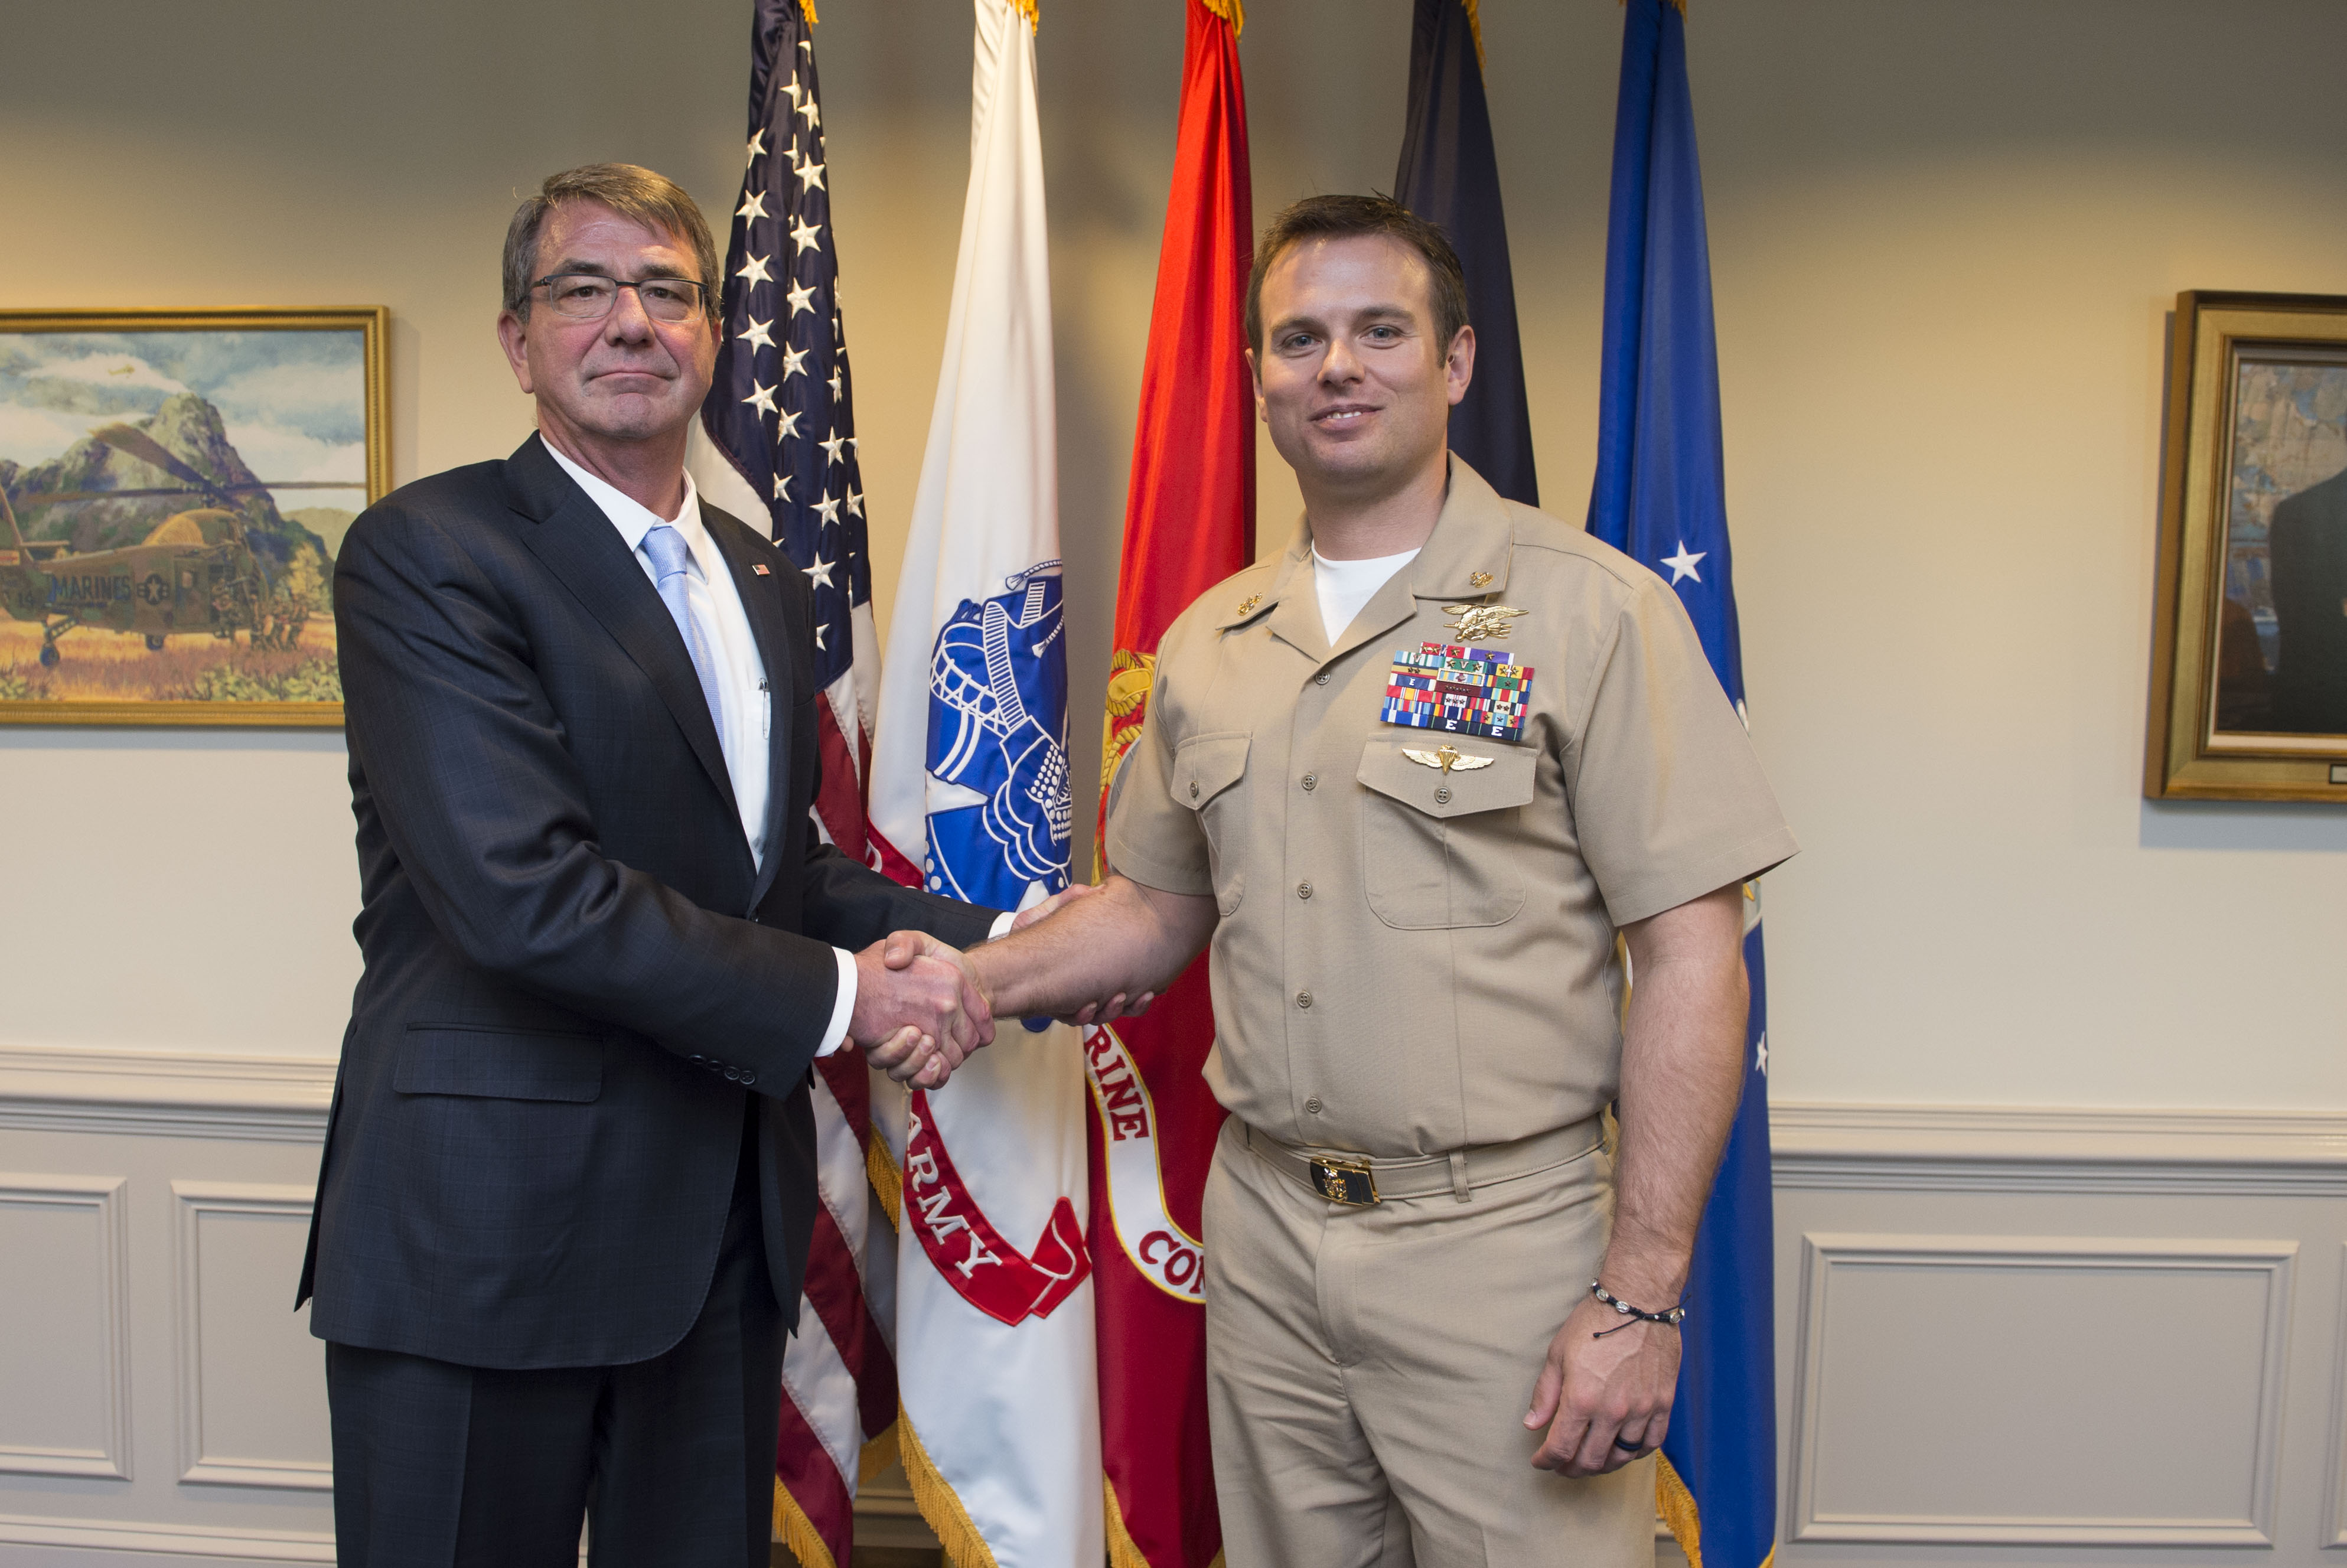 160226-D-SK590-054 Secretary of Defense Ash Carter meets with Medal of Honor recipient Senior Chief Petty Officer Edward Byers.jpg